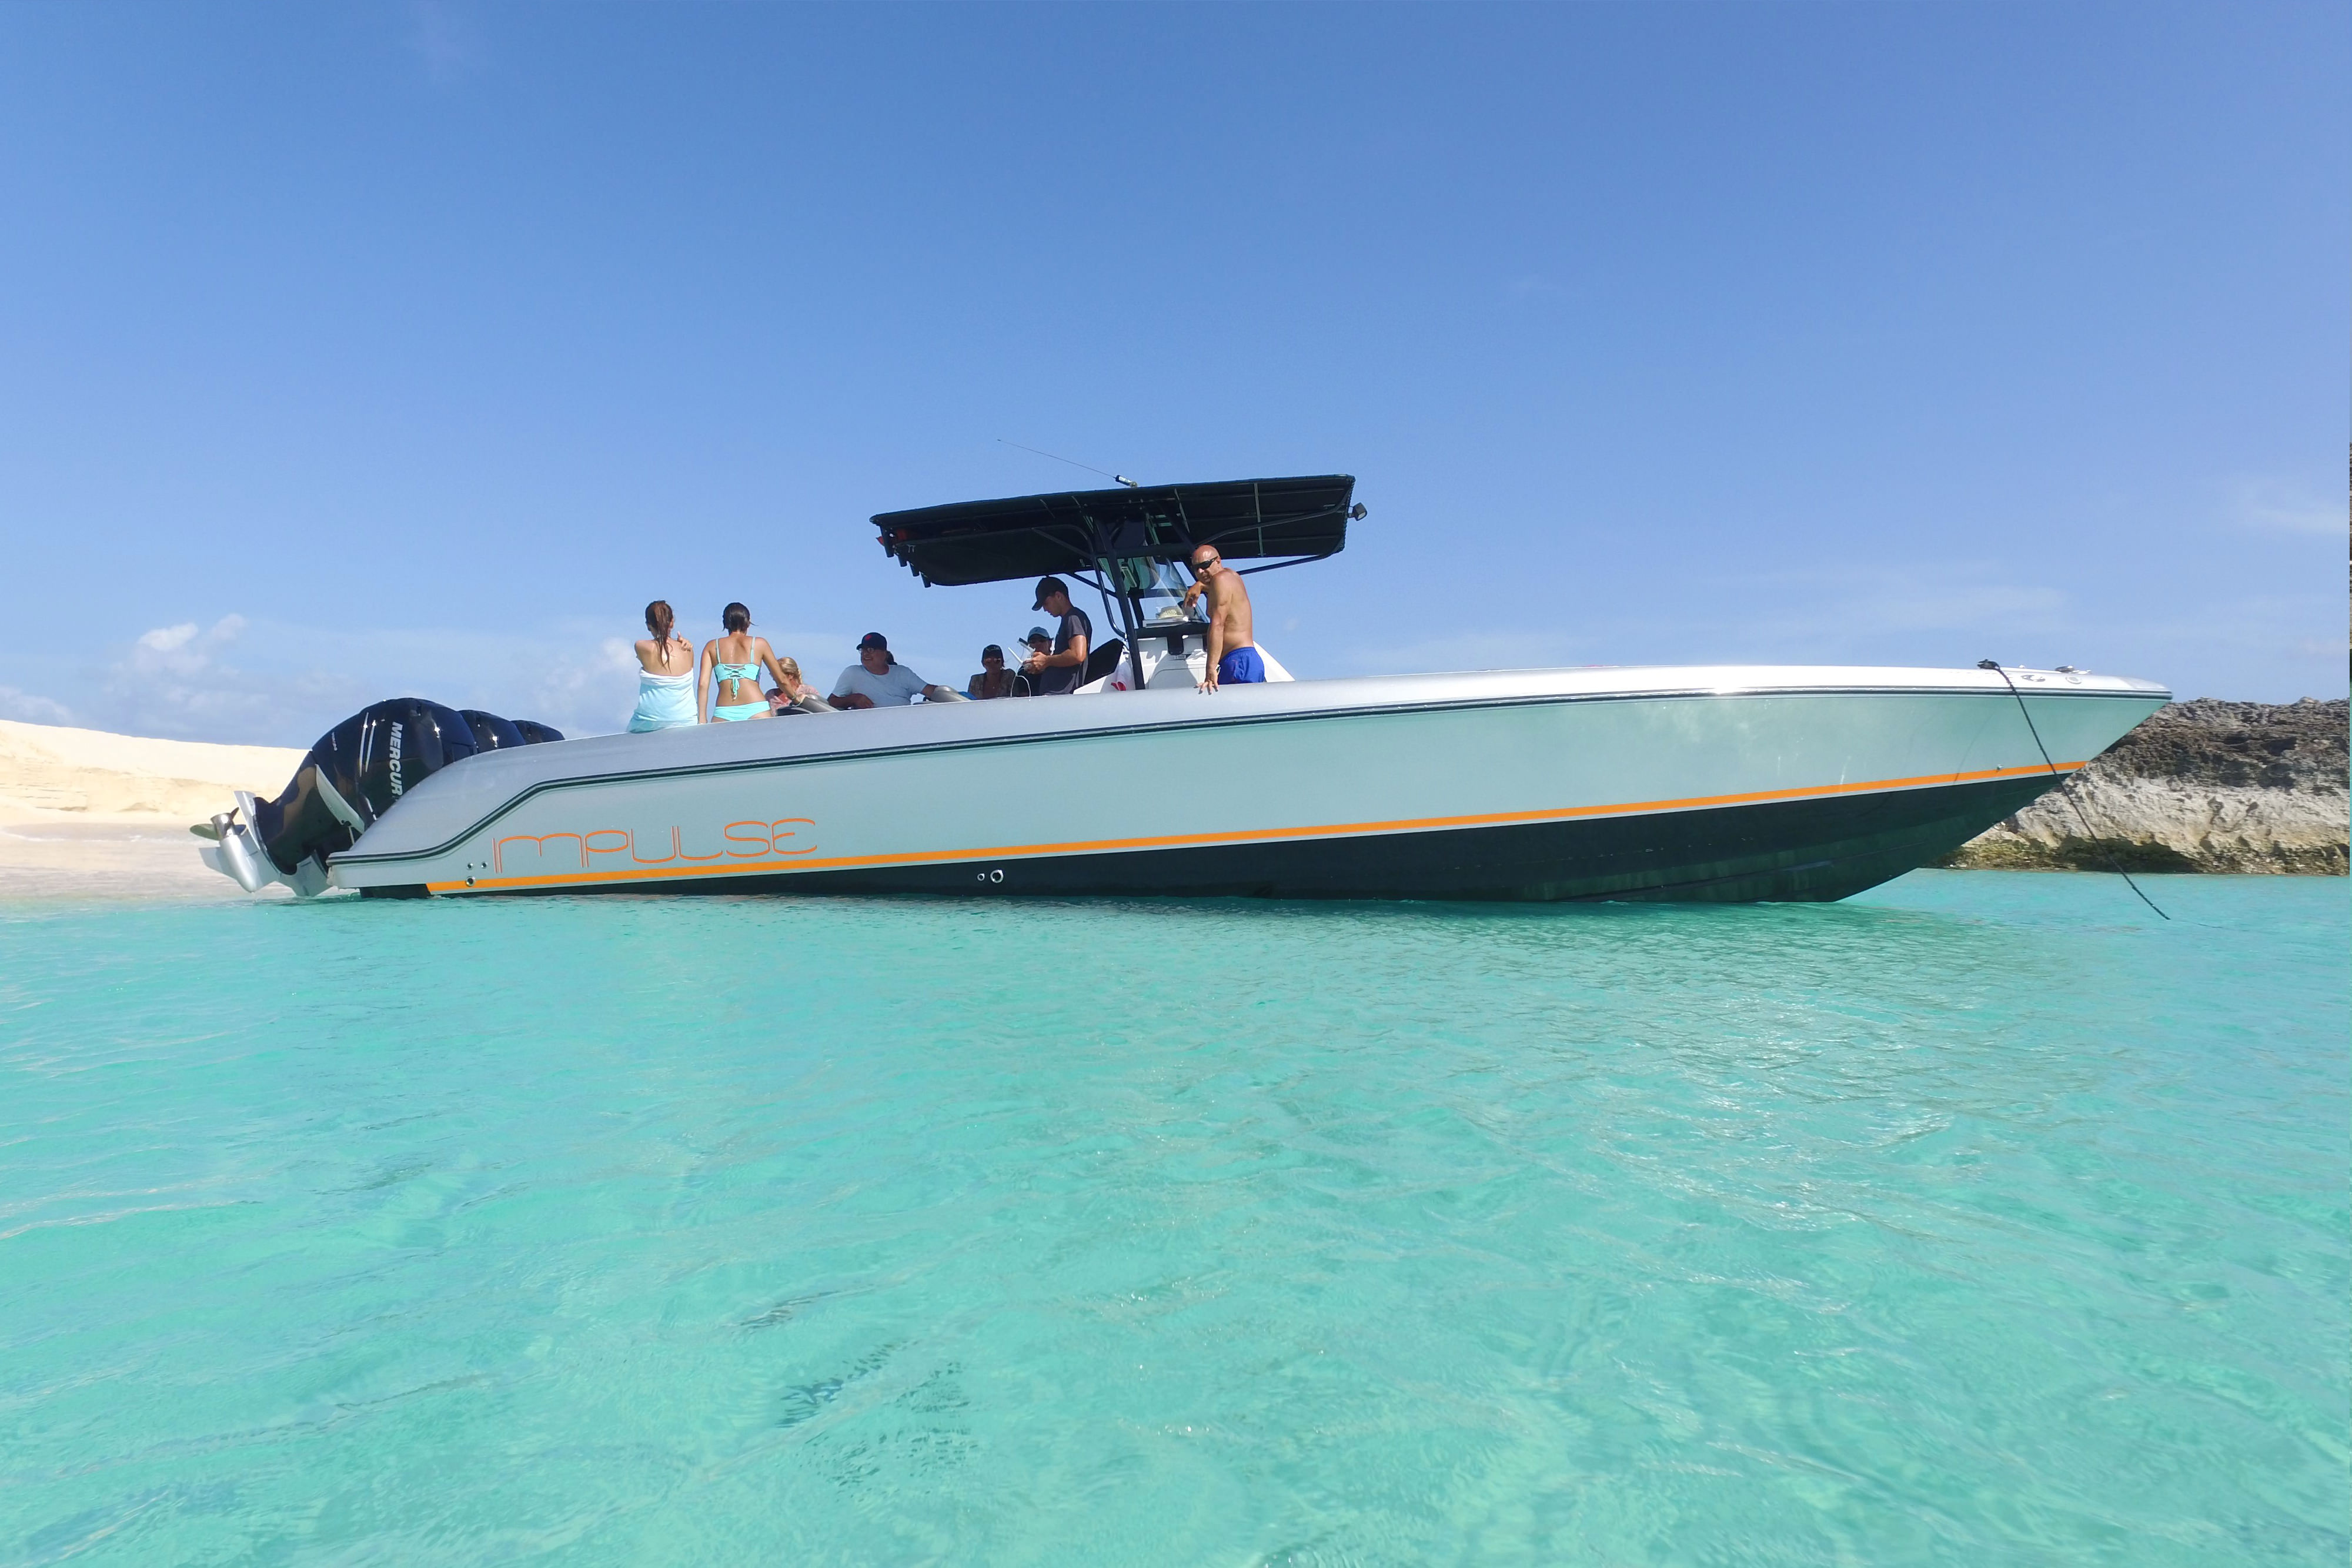 The Donzi 38 is an elegantly designed yacht, with clean lines.